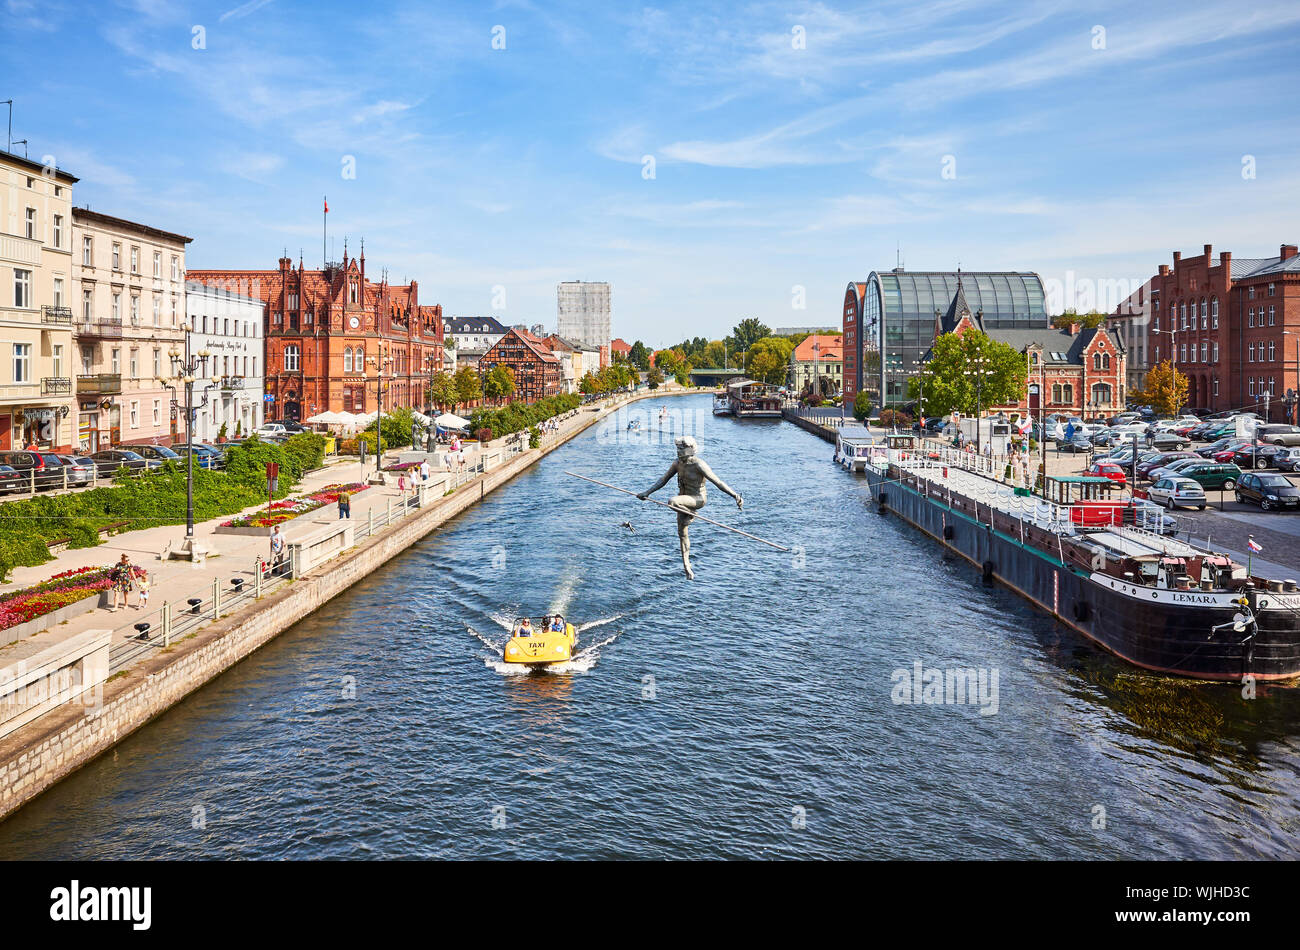 Bydgoszcz, Poland - August 25, 2019: Bydgoszcz cityscape seen from a bridge with tightrope walker sculpture over Brda River. Stock Photo